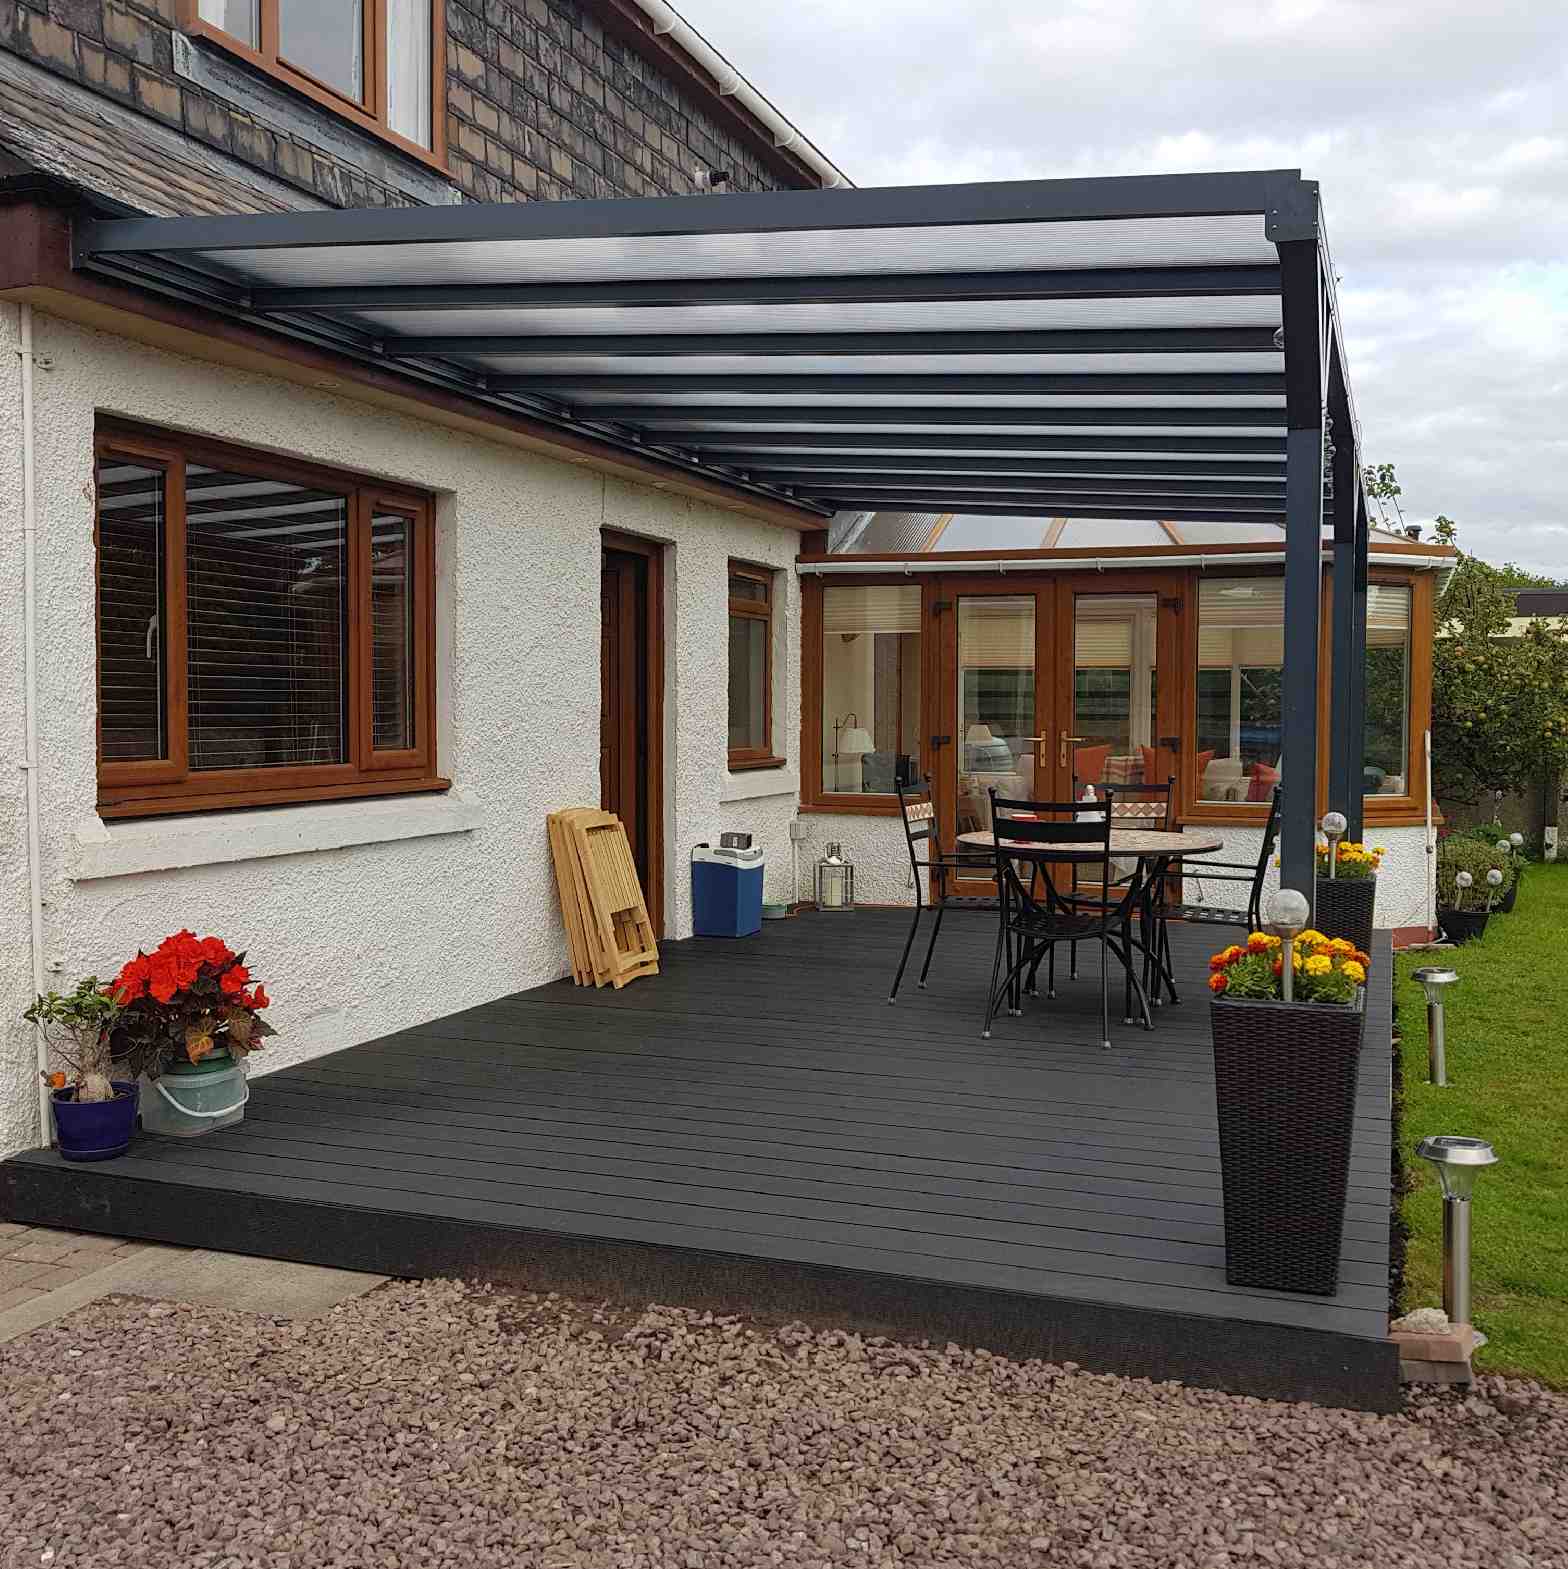 Buy Omega Verandah, Anthracite Grey, 6mm Glass Clear Plate Polycarbonate Glazing - 10.5m (W) x 1.5m (P), (5) Supporting Posts online today